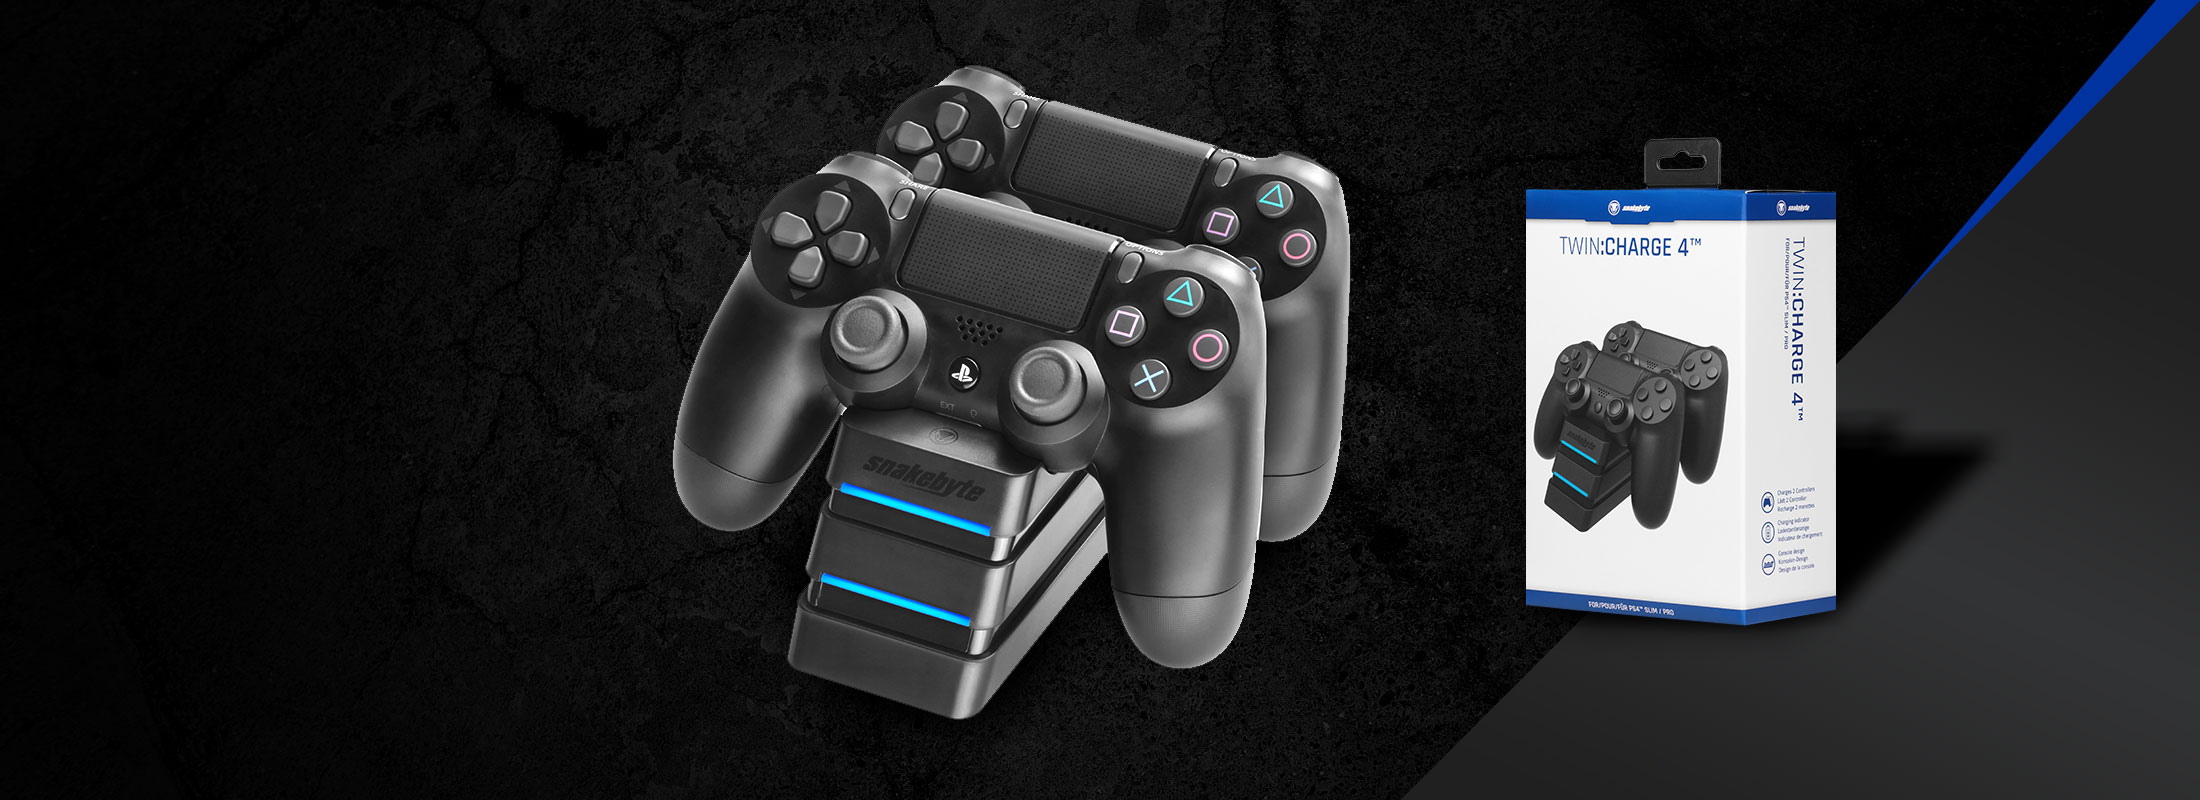 Snakebyte ps3 controller on ps4